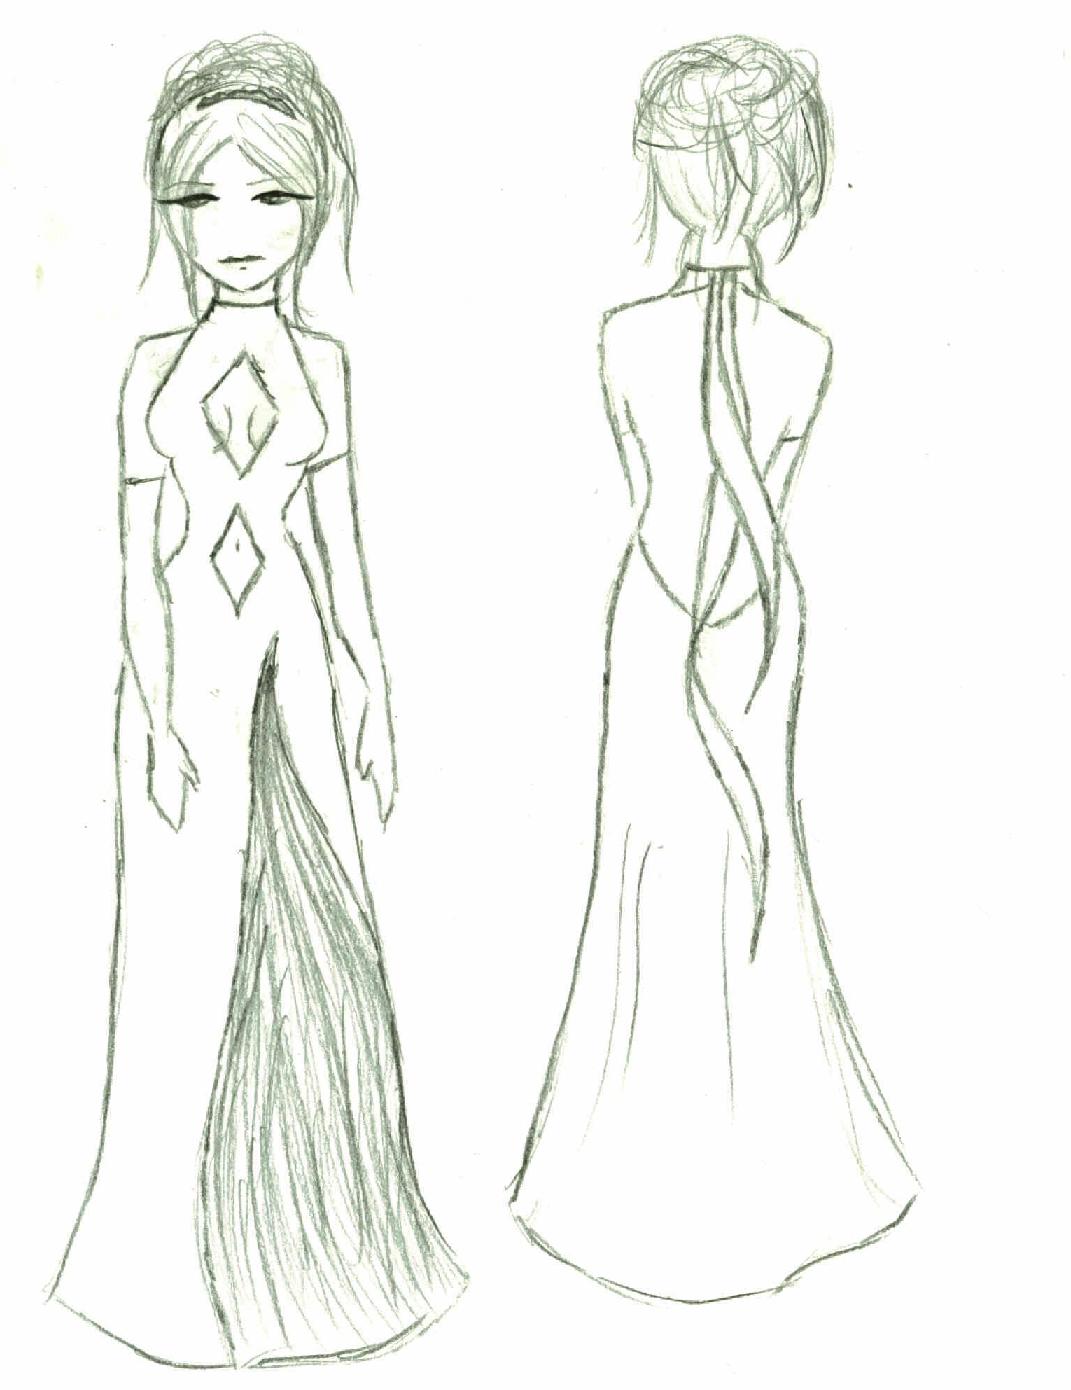 Evening Gown by Mandi_Cottontail